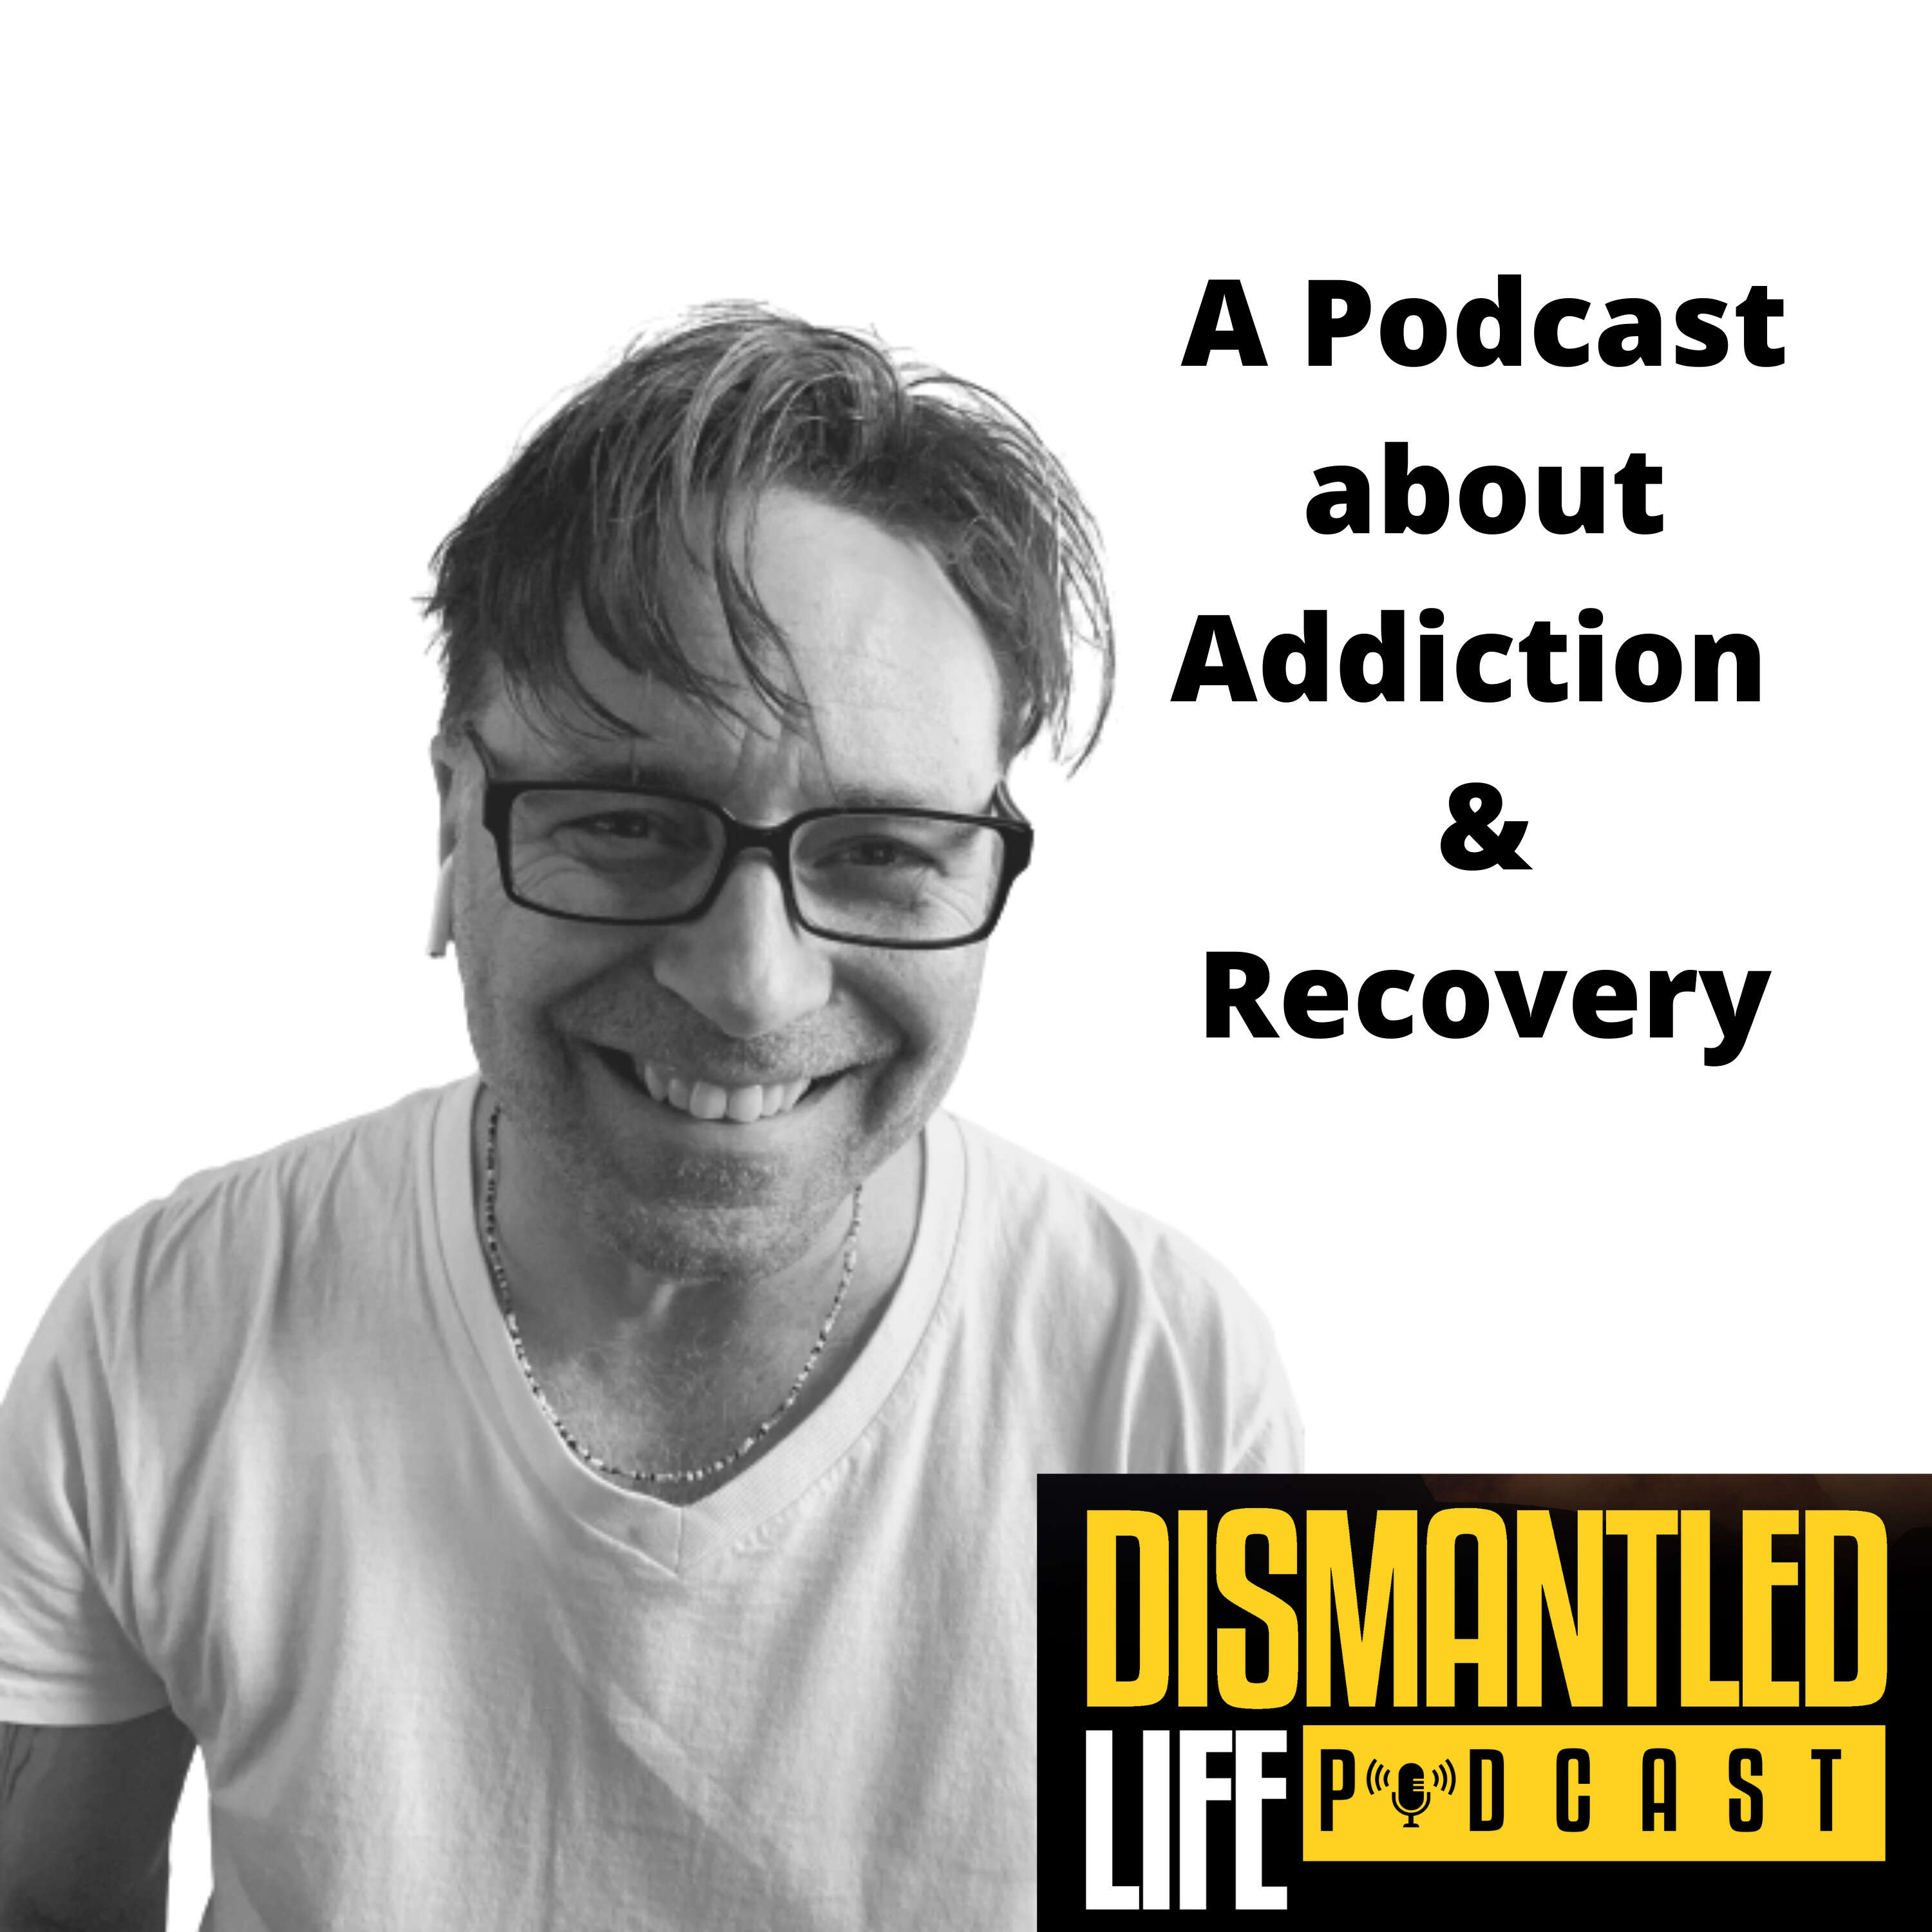 016 - Jesse : My struggle with alcohol, cocaine, compulsive eating, and anxiety